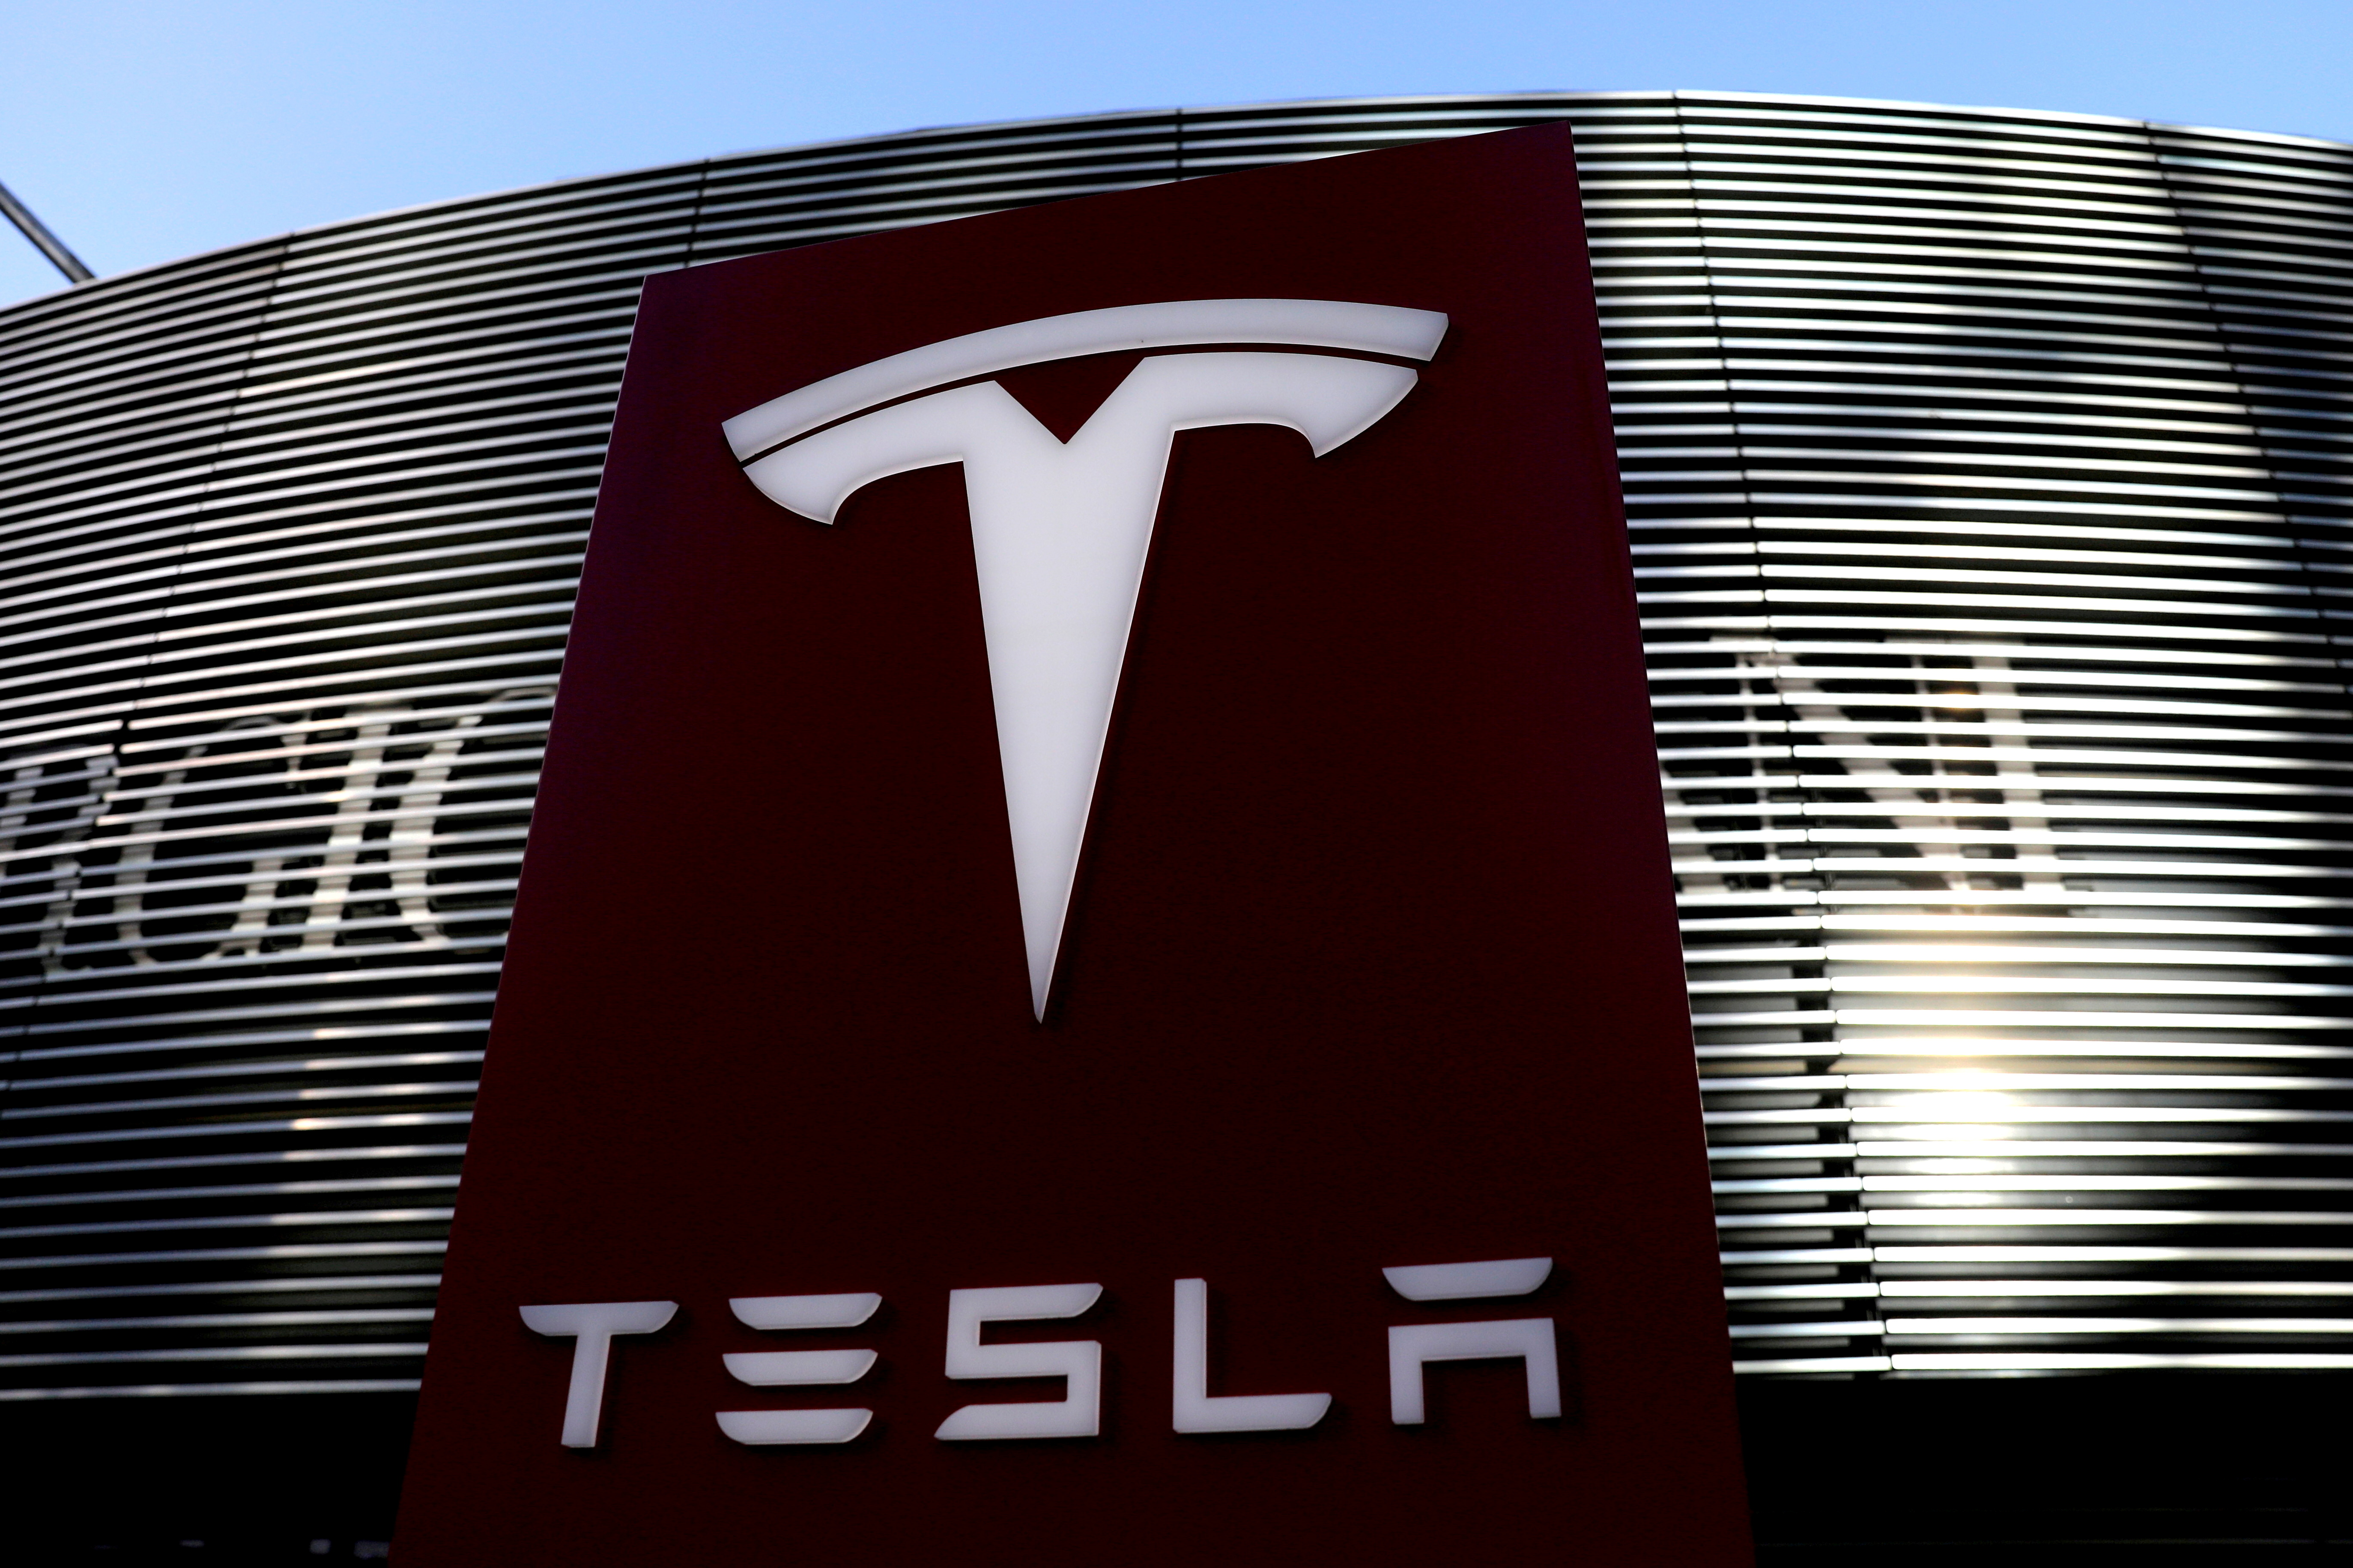 A logo of the electric-vehicle maker Tesla is seen near a shopping complex in Beijing, China January 5, 2021. REUTERS/Tingshu Wang